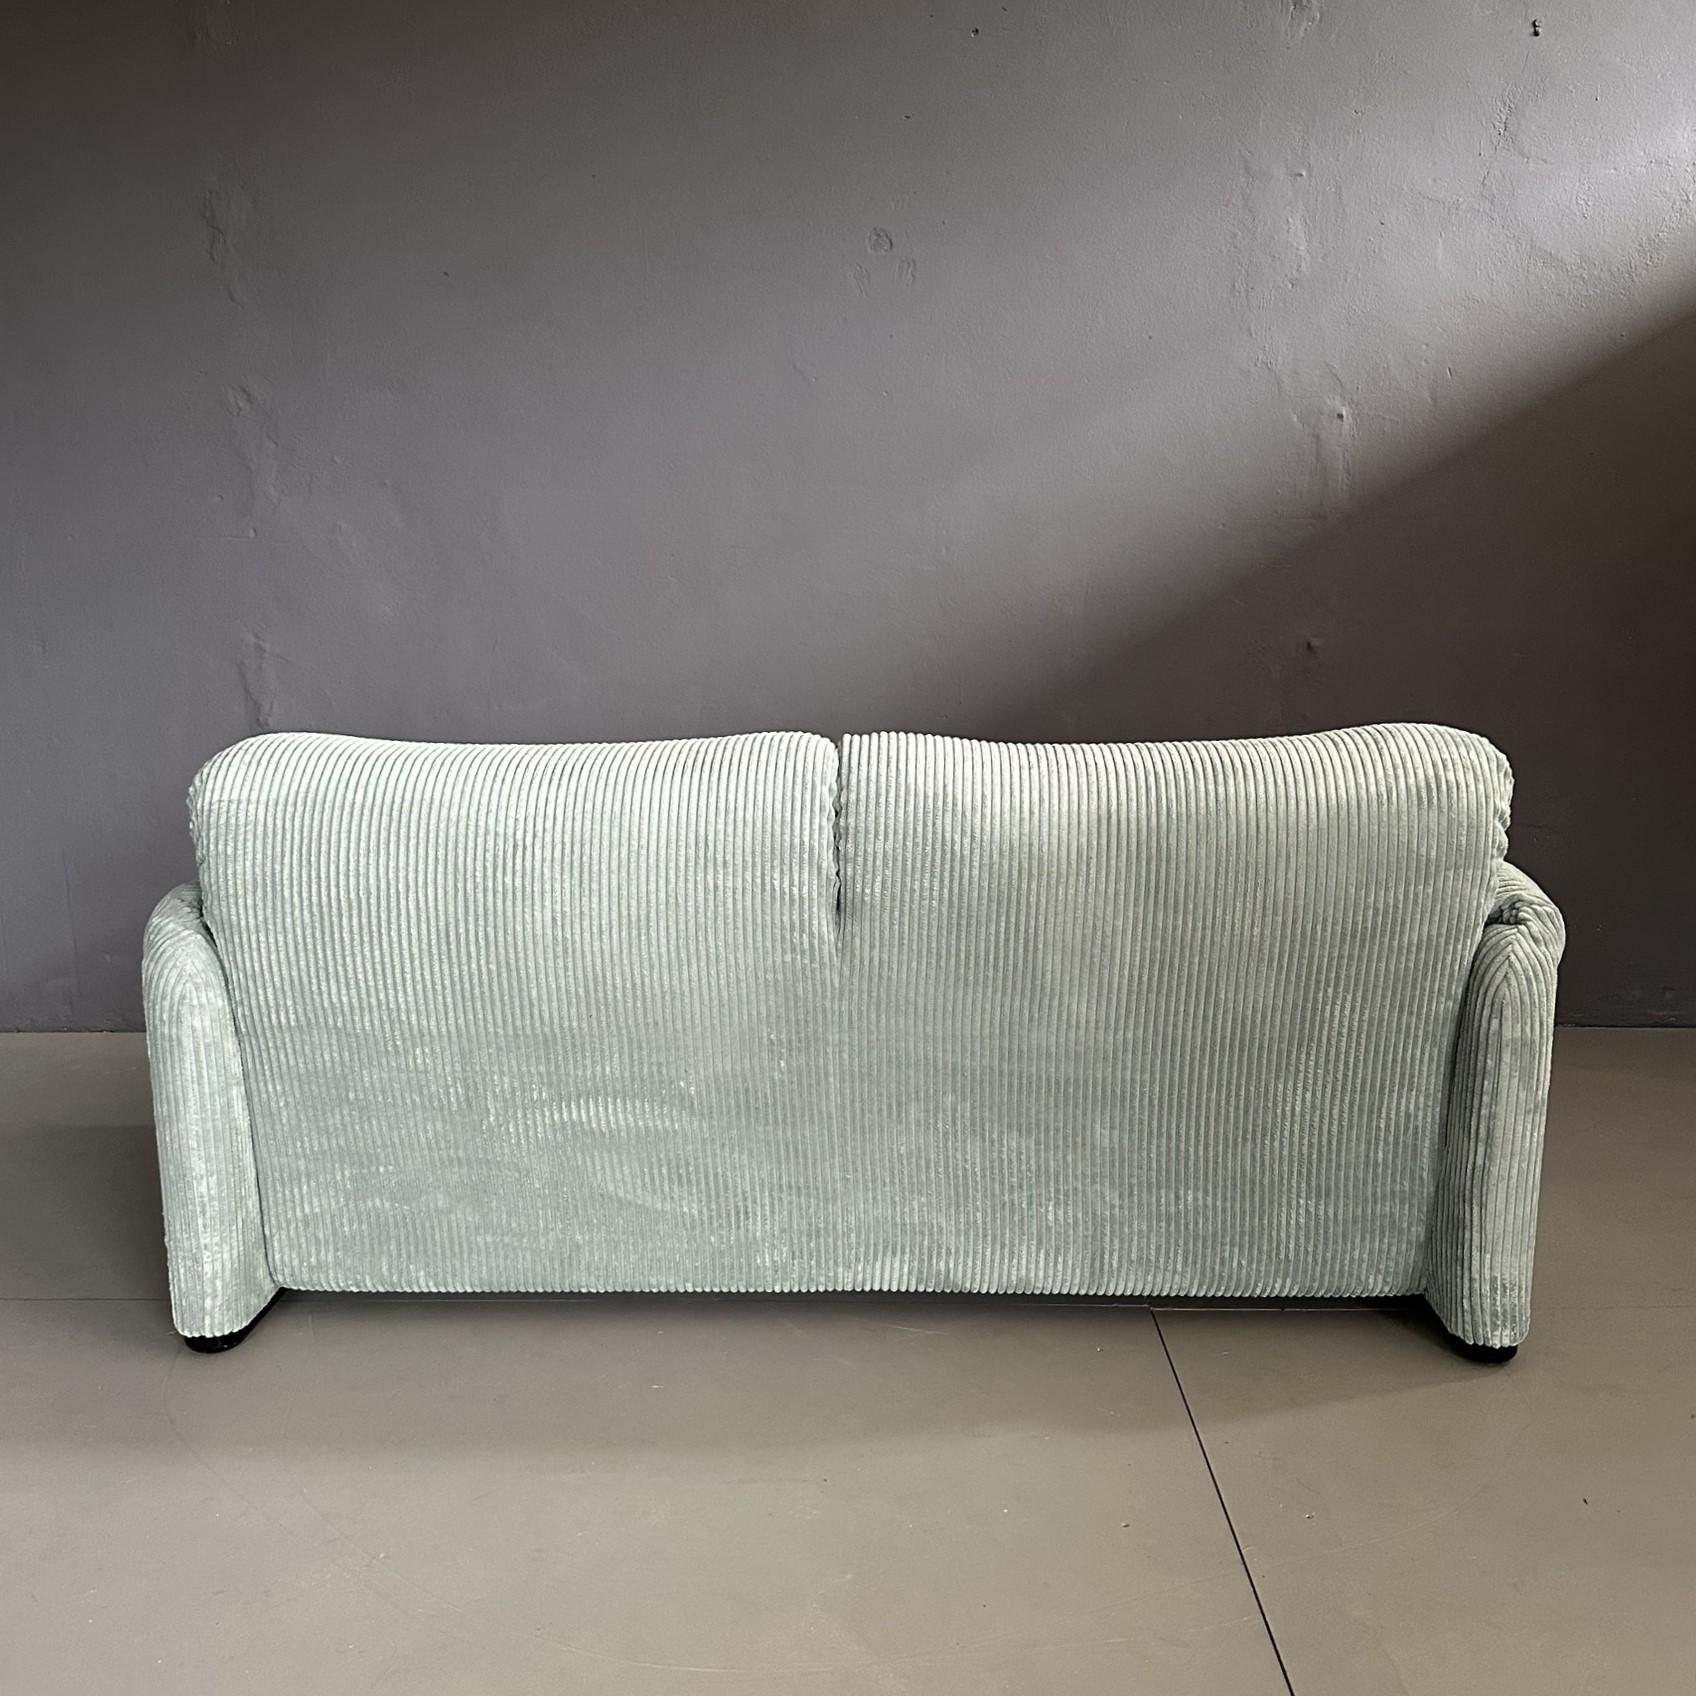 Italian Pair of Maralunga sofas design by Vico Magistretti for Cassina 2seater - 3seater For Sale